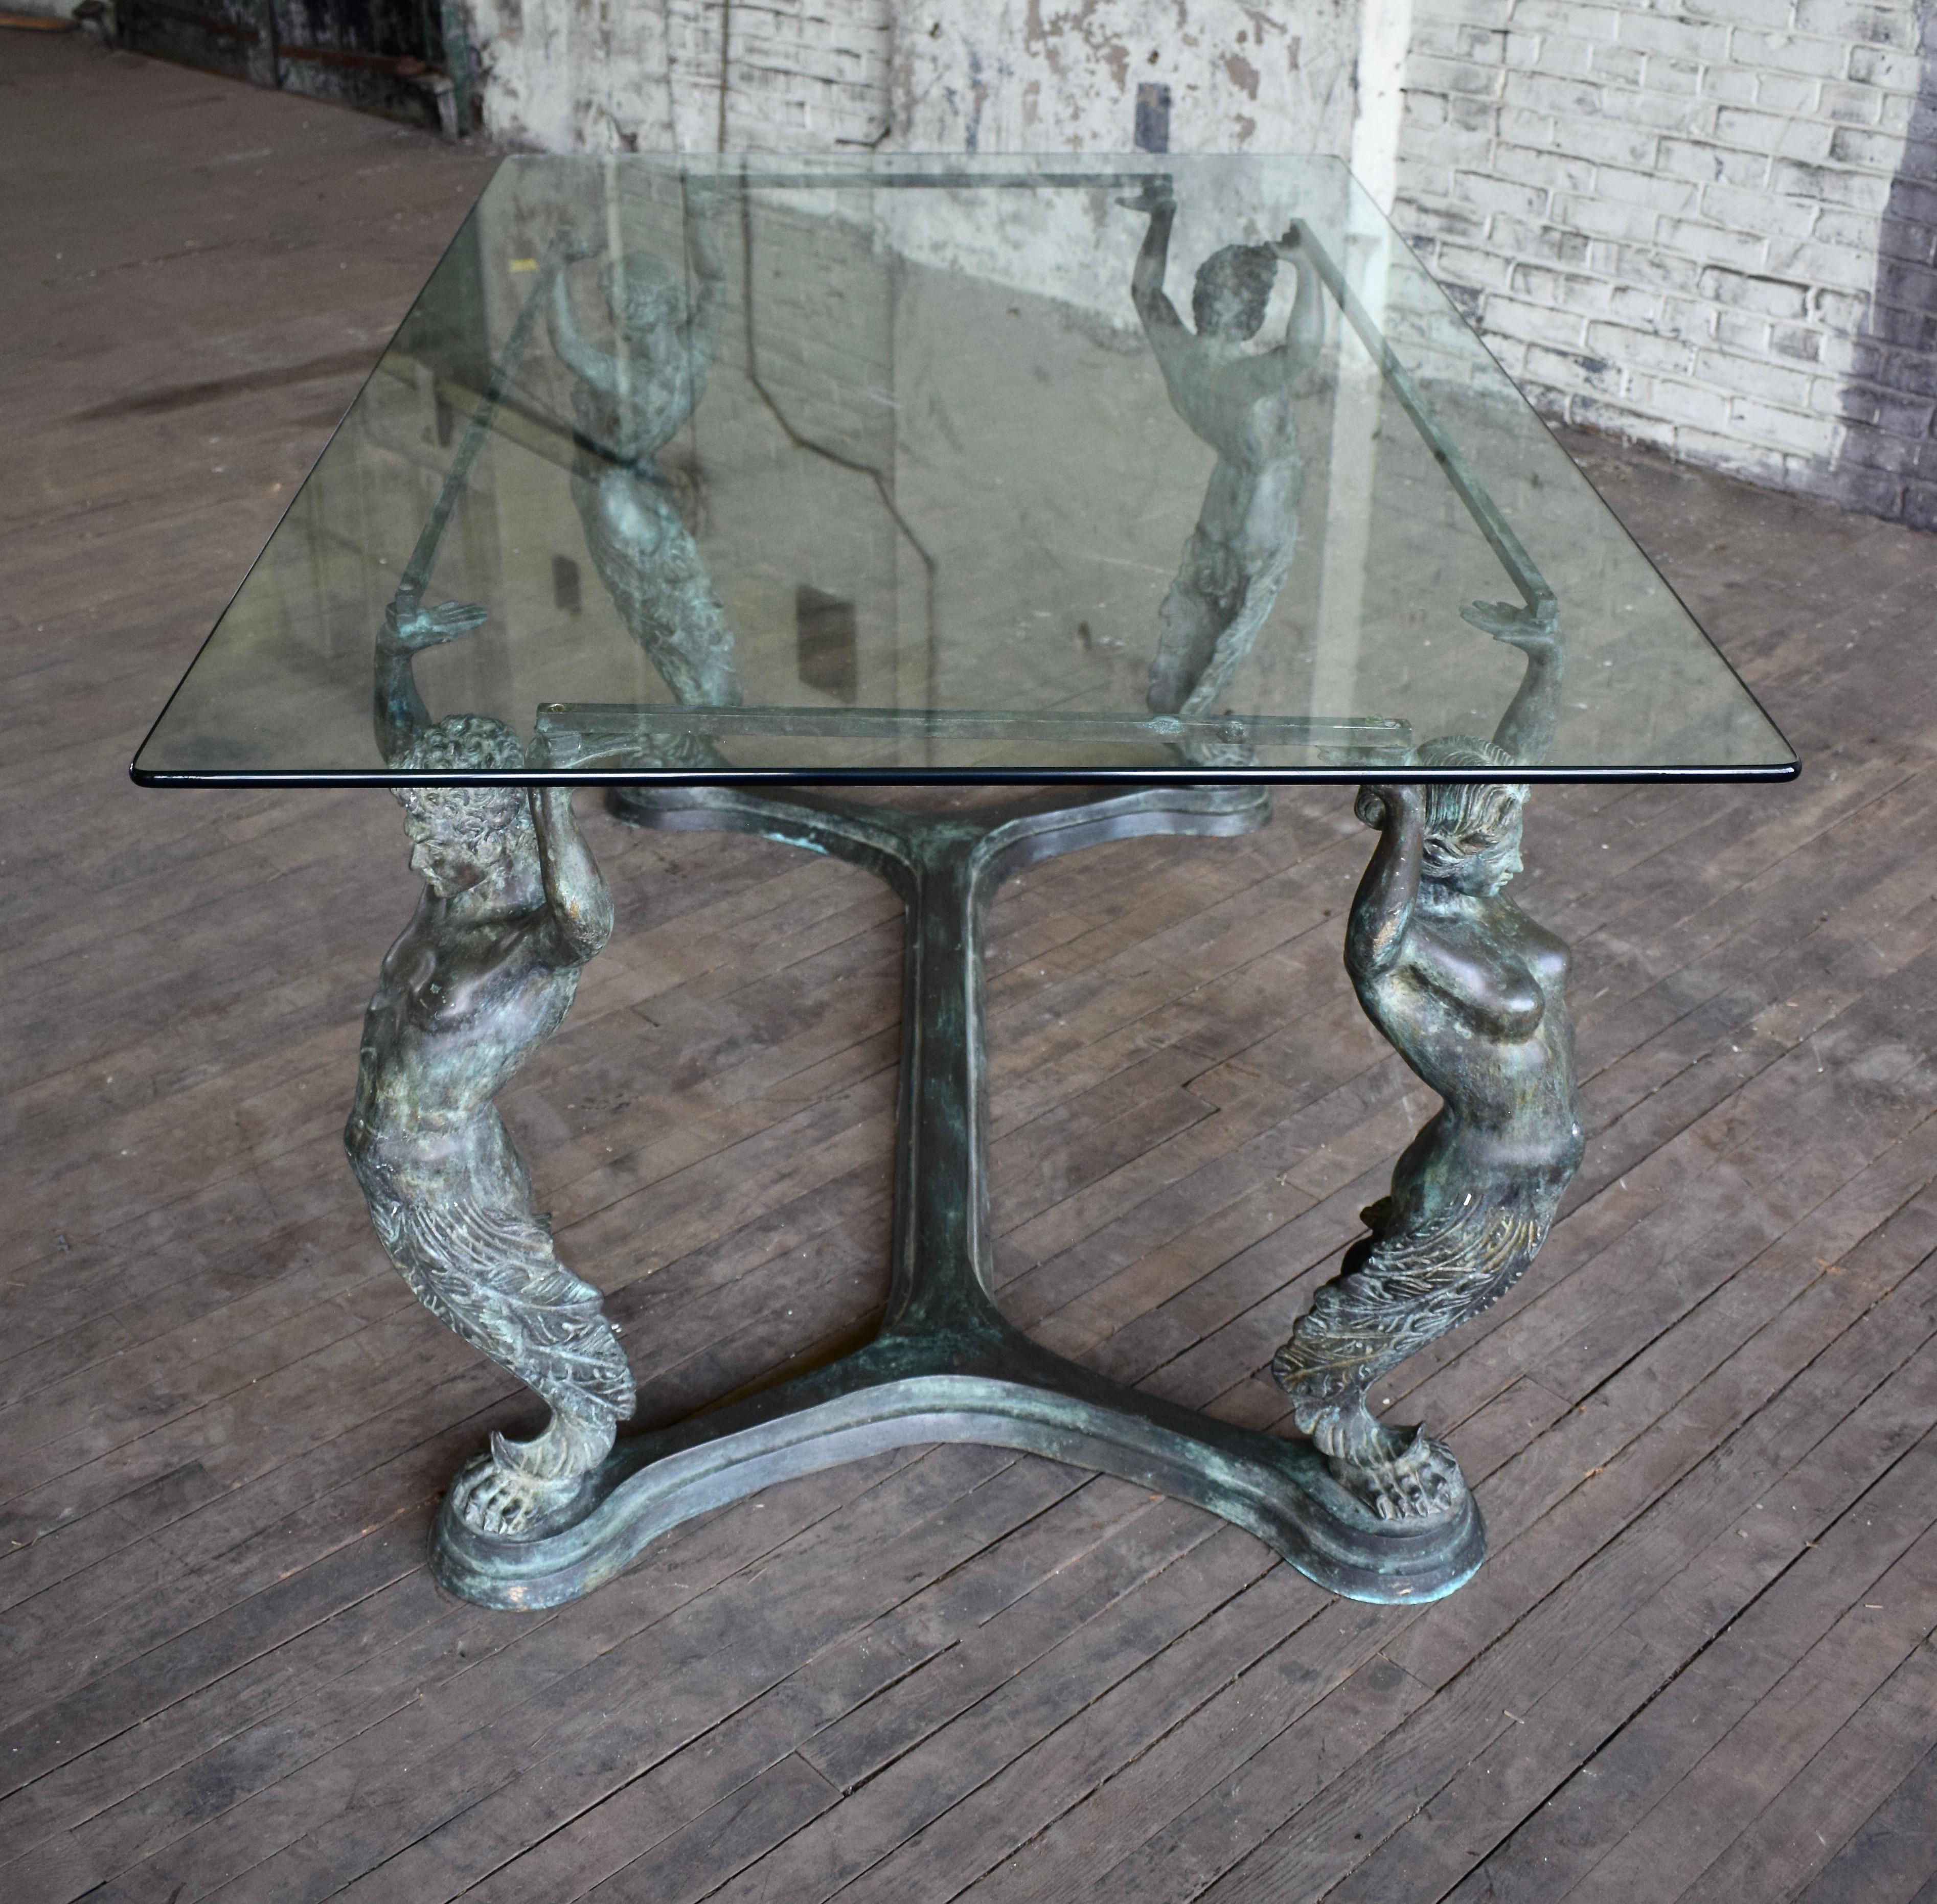 An unusual Italian bronze dining table depicting four supporting Caryatid & Atlas figures with outstretched arms suspending a floating glass top. Base measurements 60